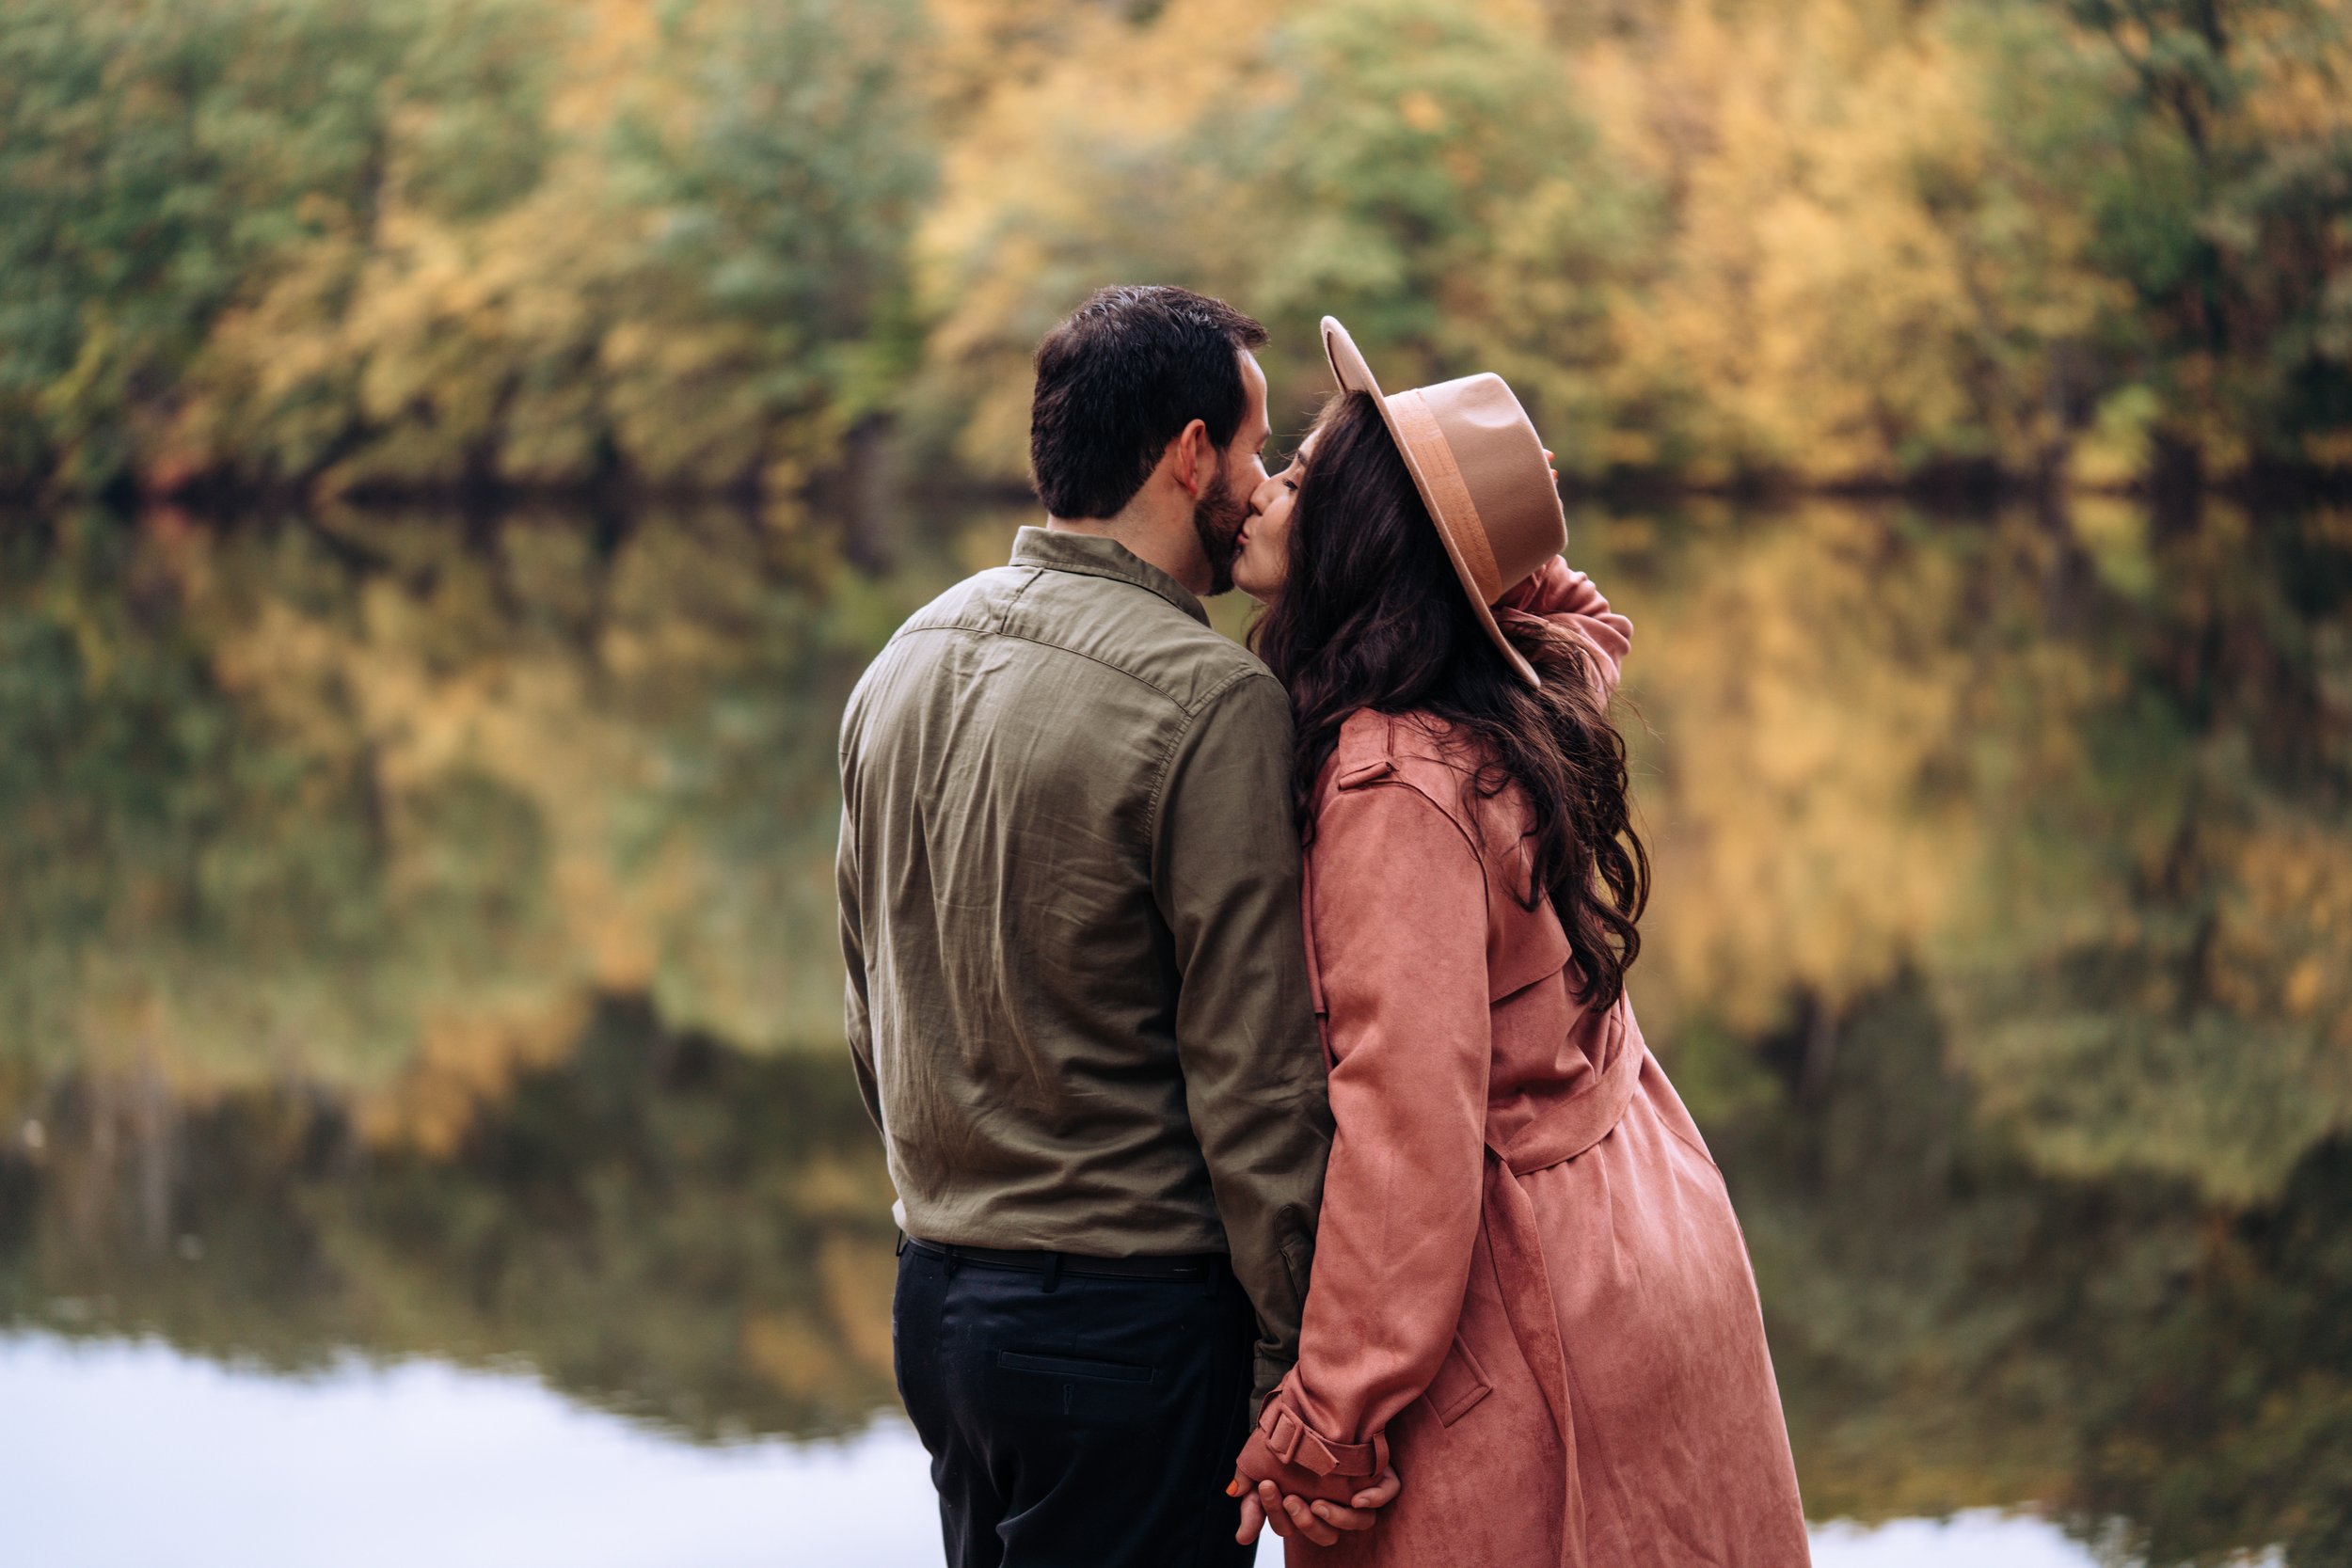 A couple stands against the backdrop of autumn trees reflected in a lake. They are both dark haired and are holding hands and kissing. The woman is wearing a pink trench coat and is holding a straw hat to her head with her free hand.